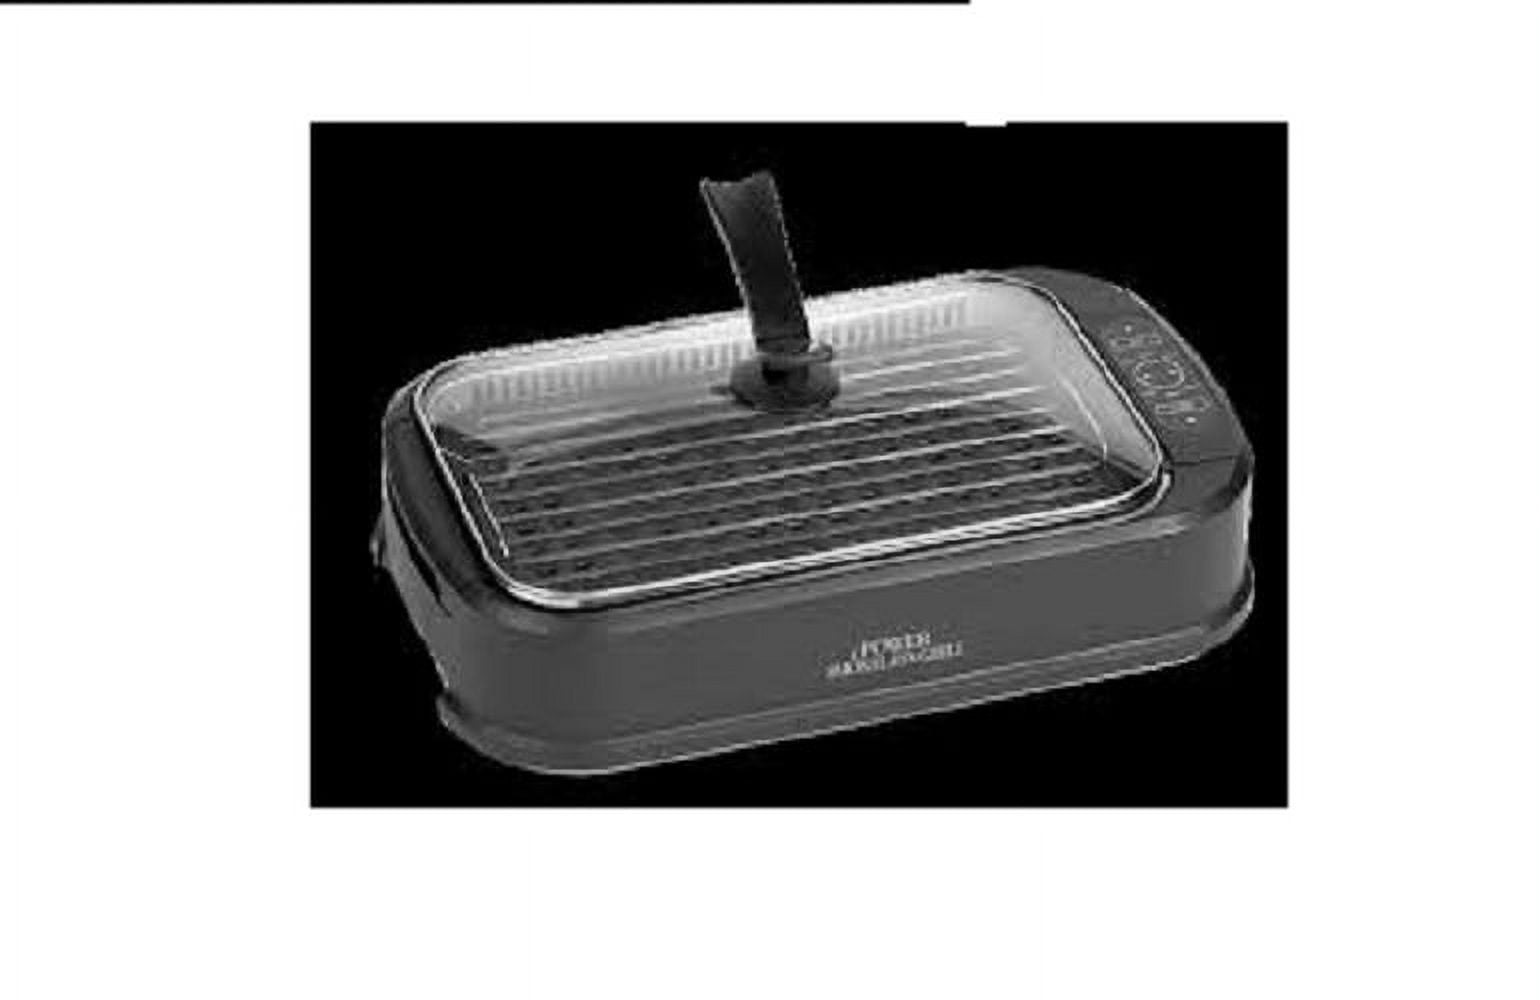 JOYDING Smokeless Non Stick Electric Grill with Glass Lid